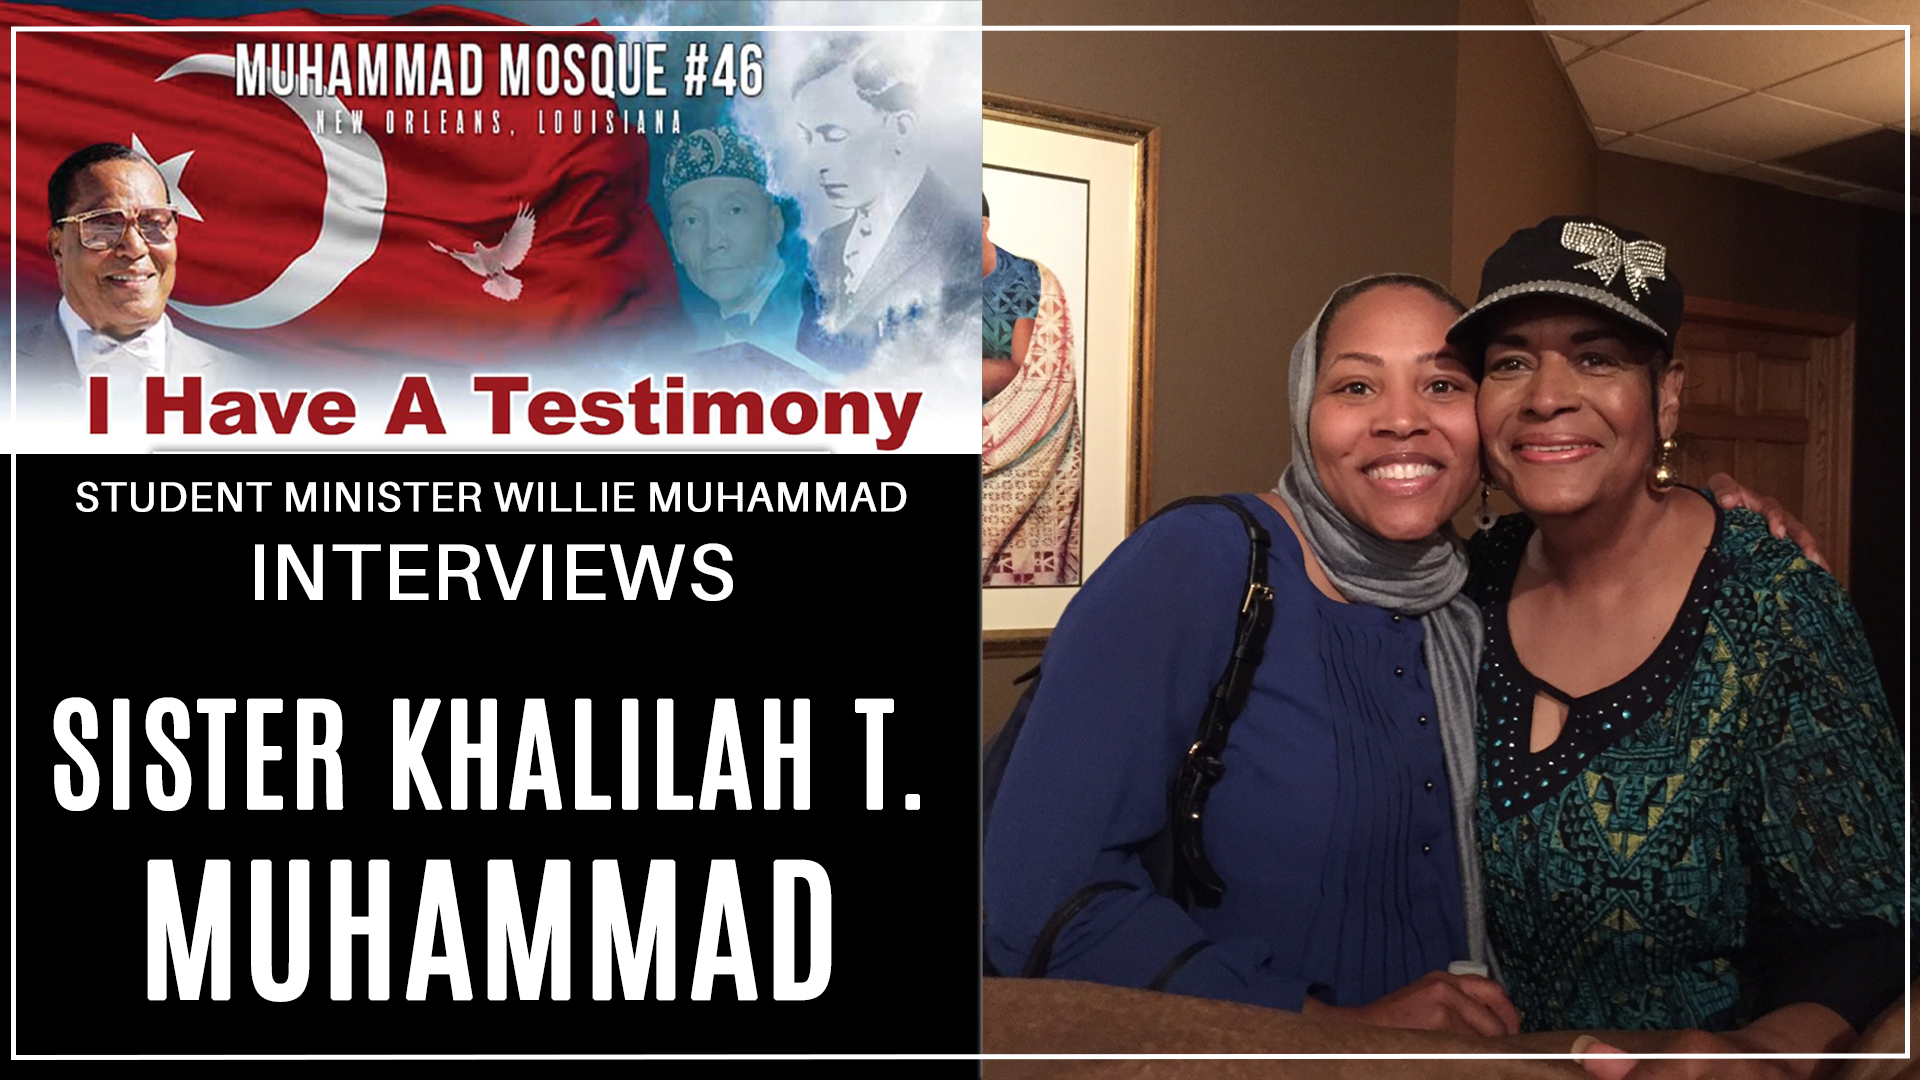 I Have A Testimony: Interview with Sister Khalilah T Muhammad